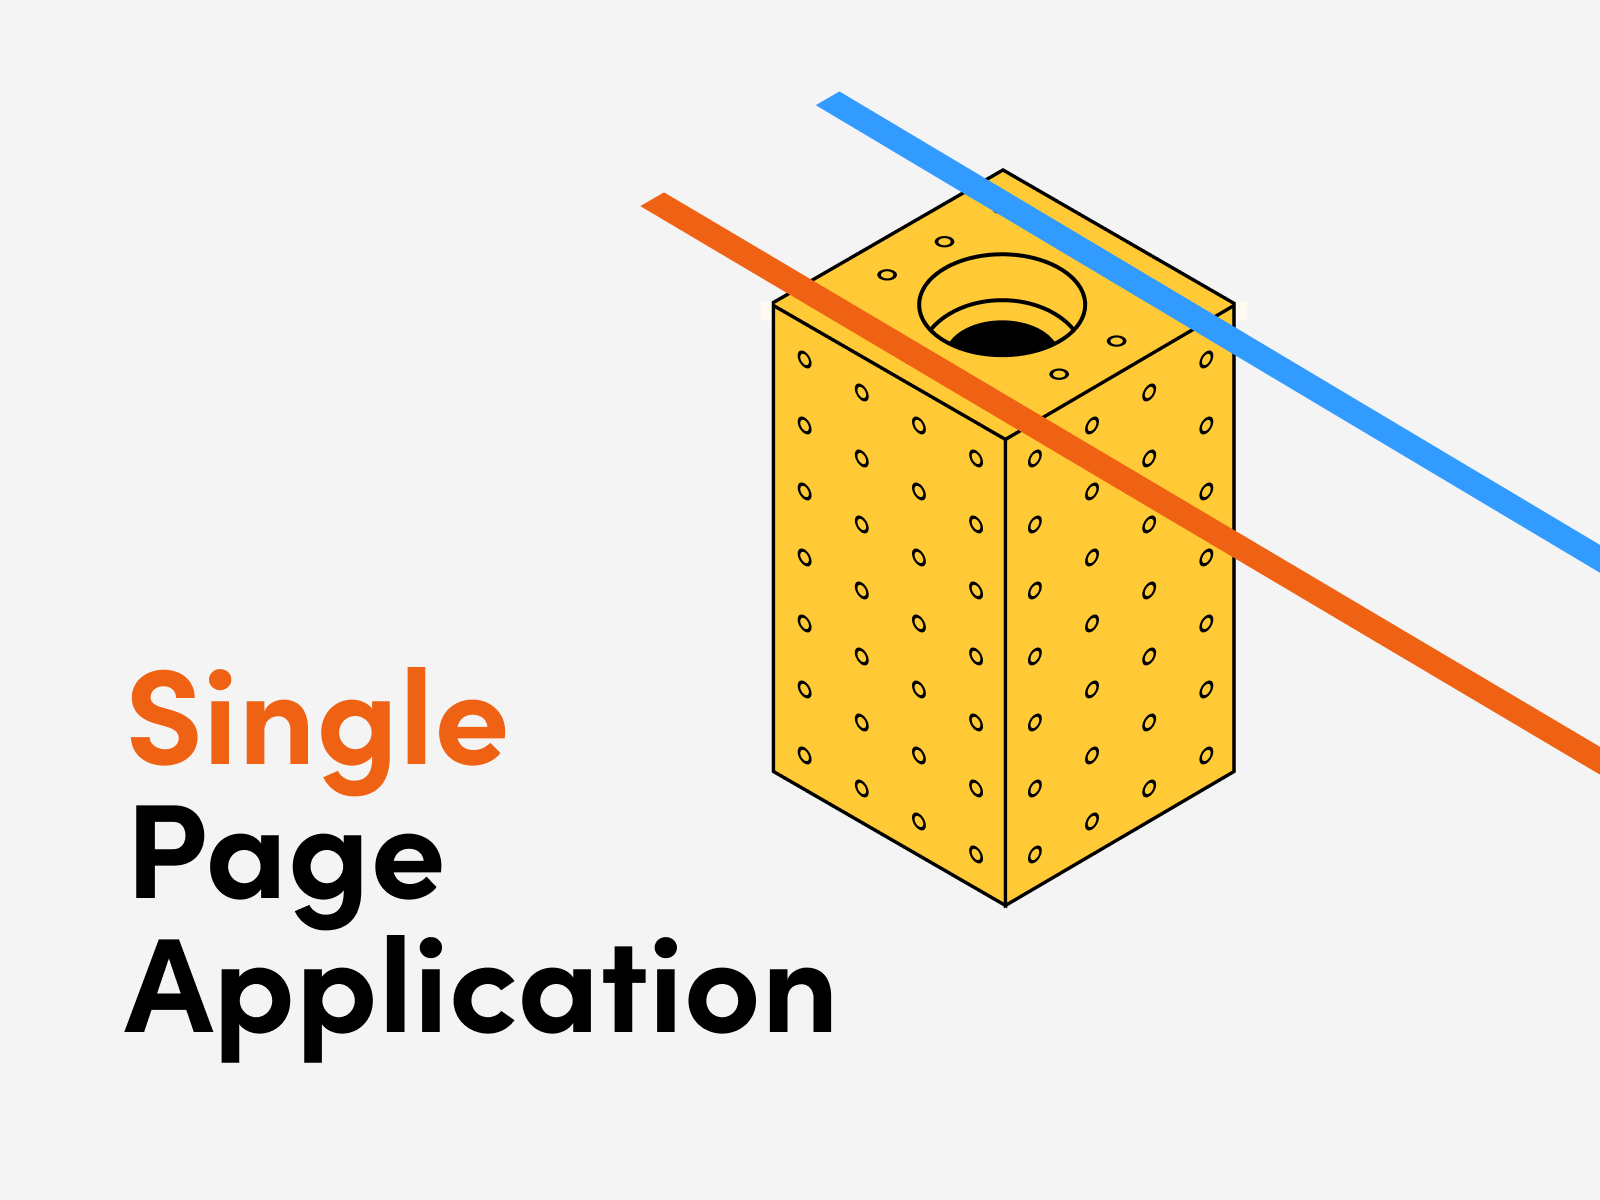 How does Single Page Application works?